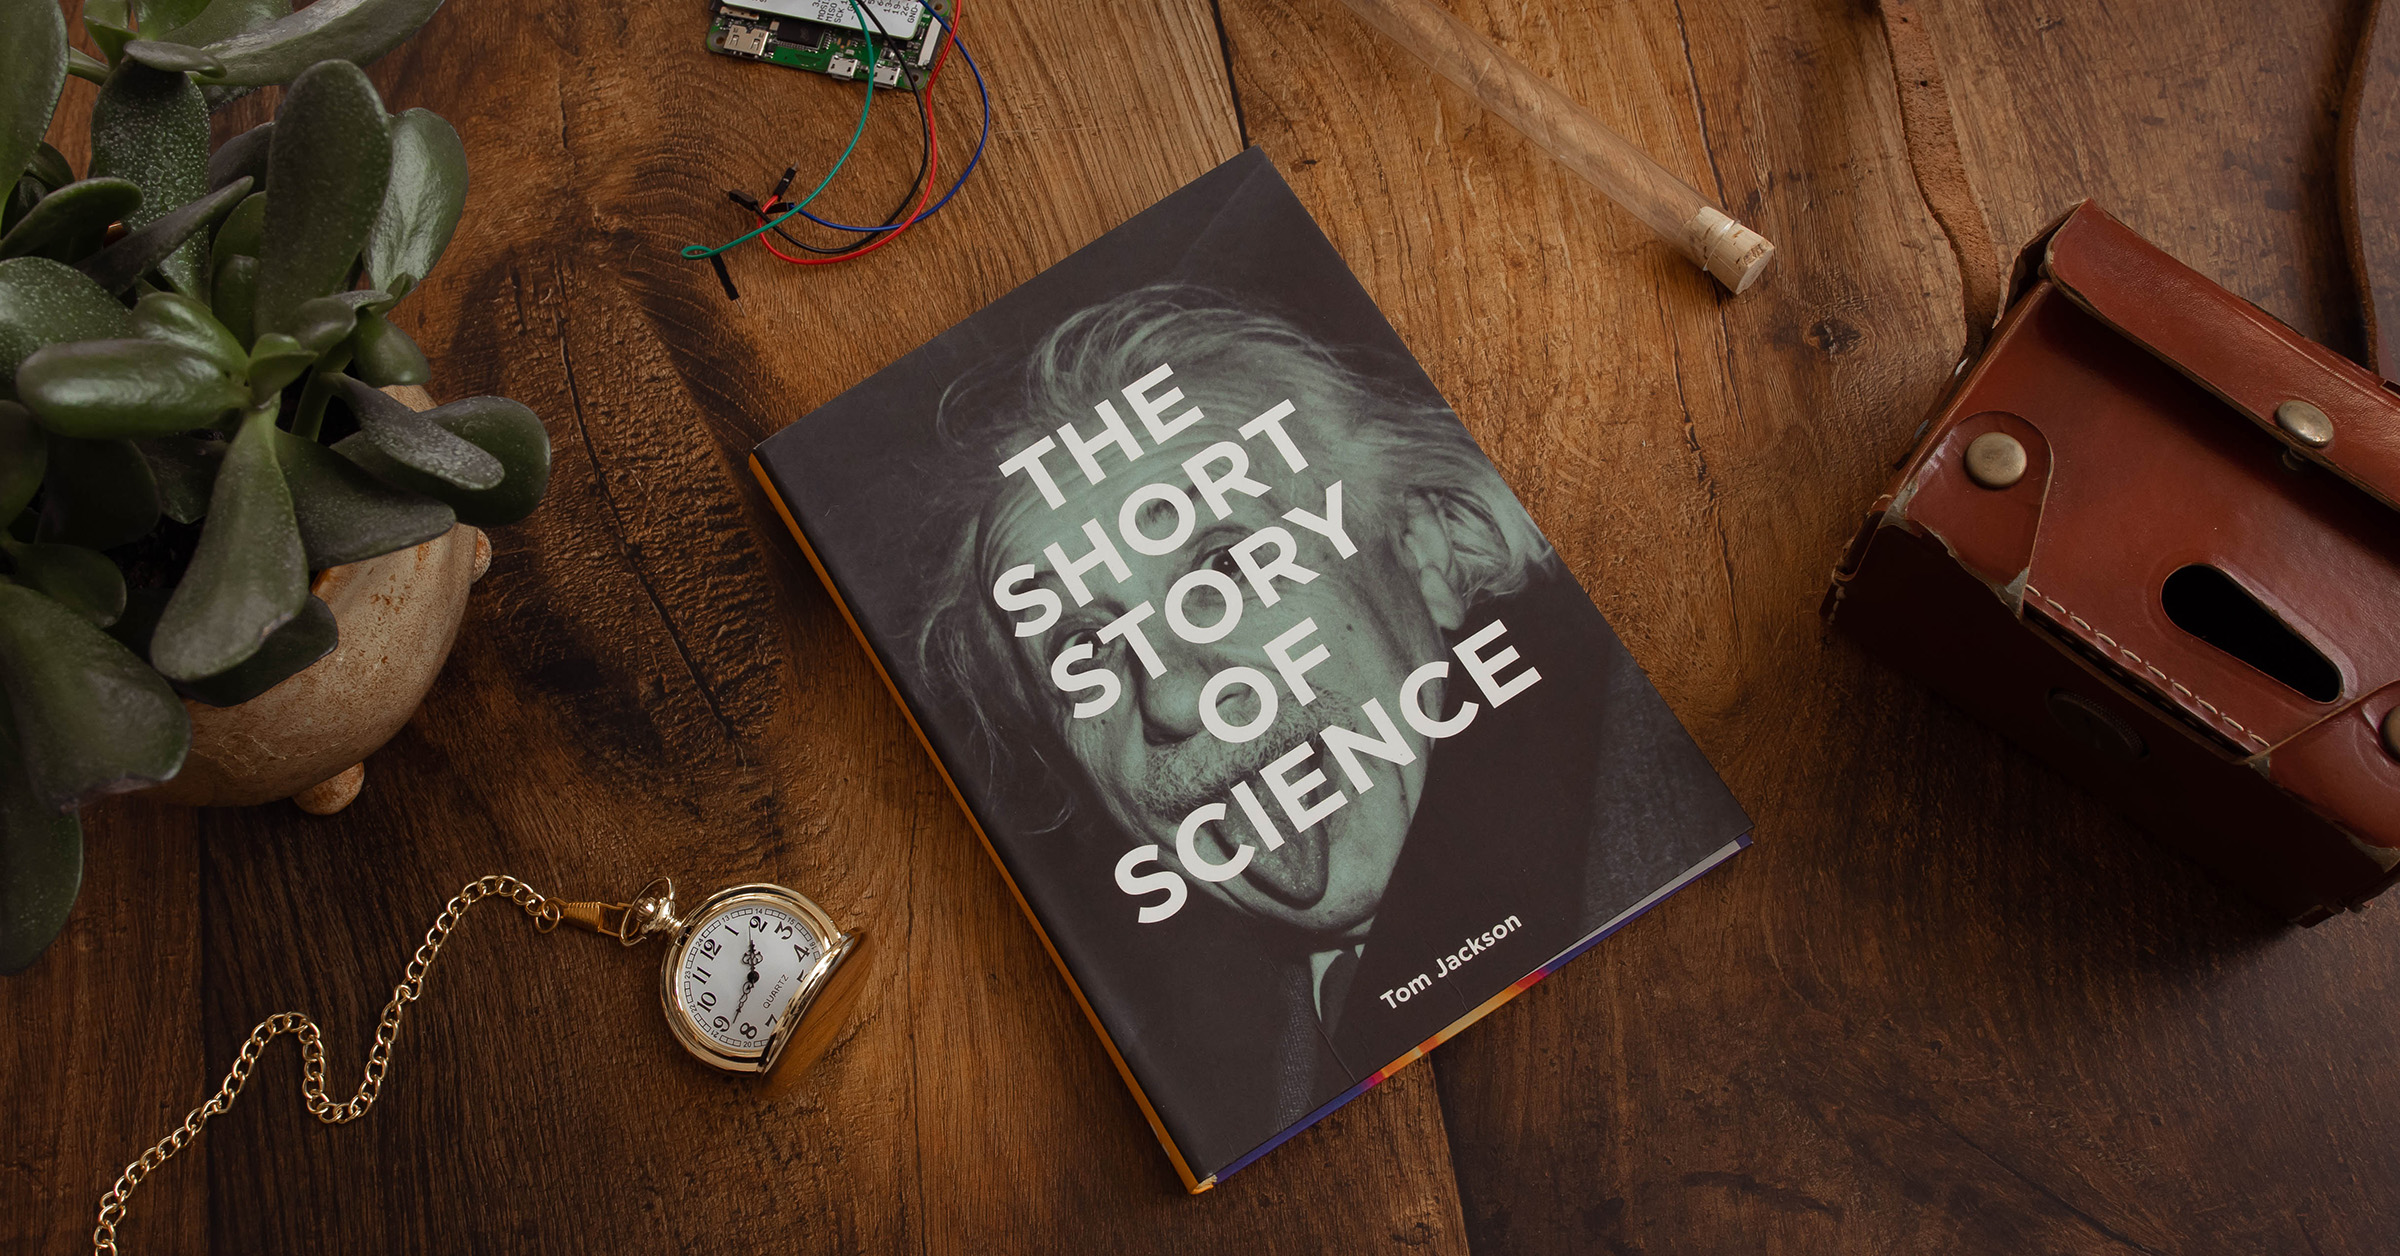 The Short Story of Science